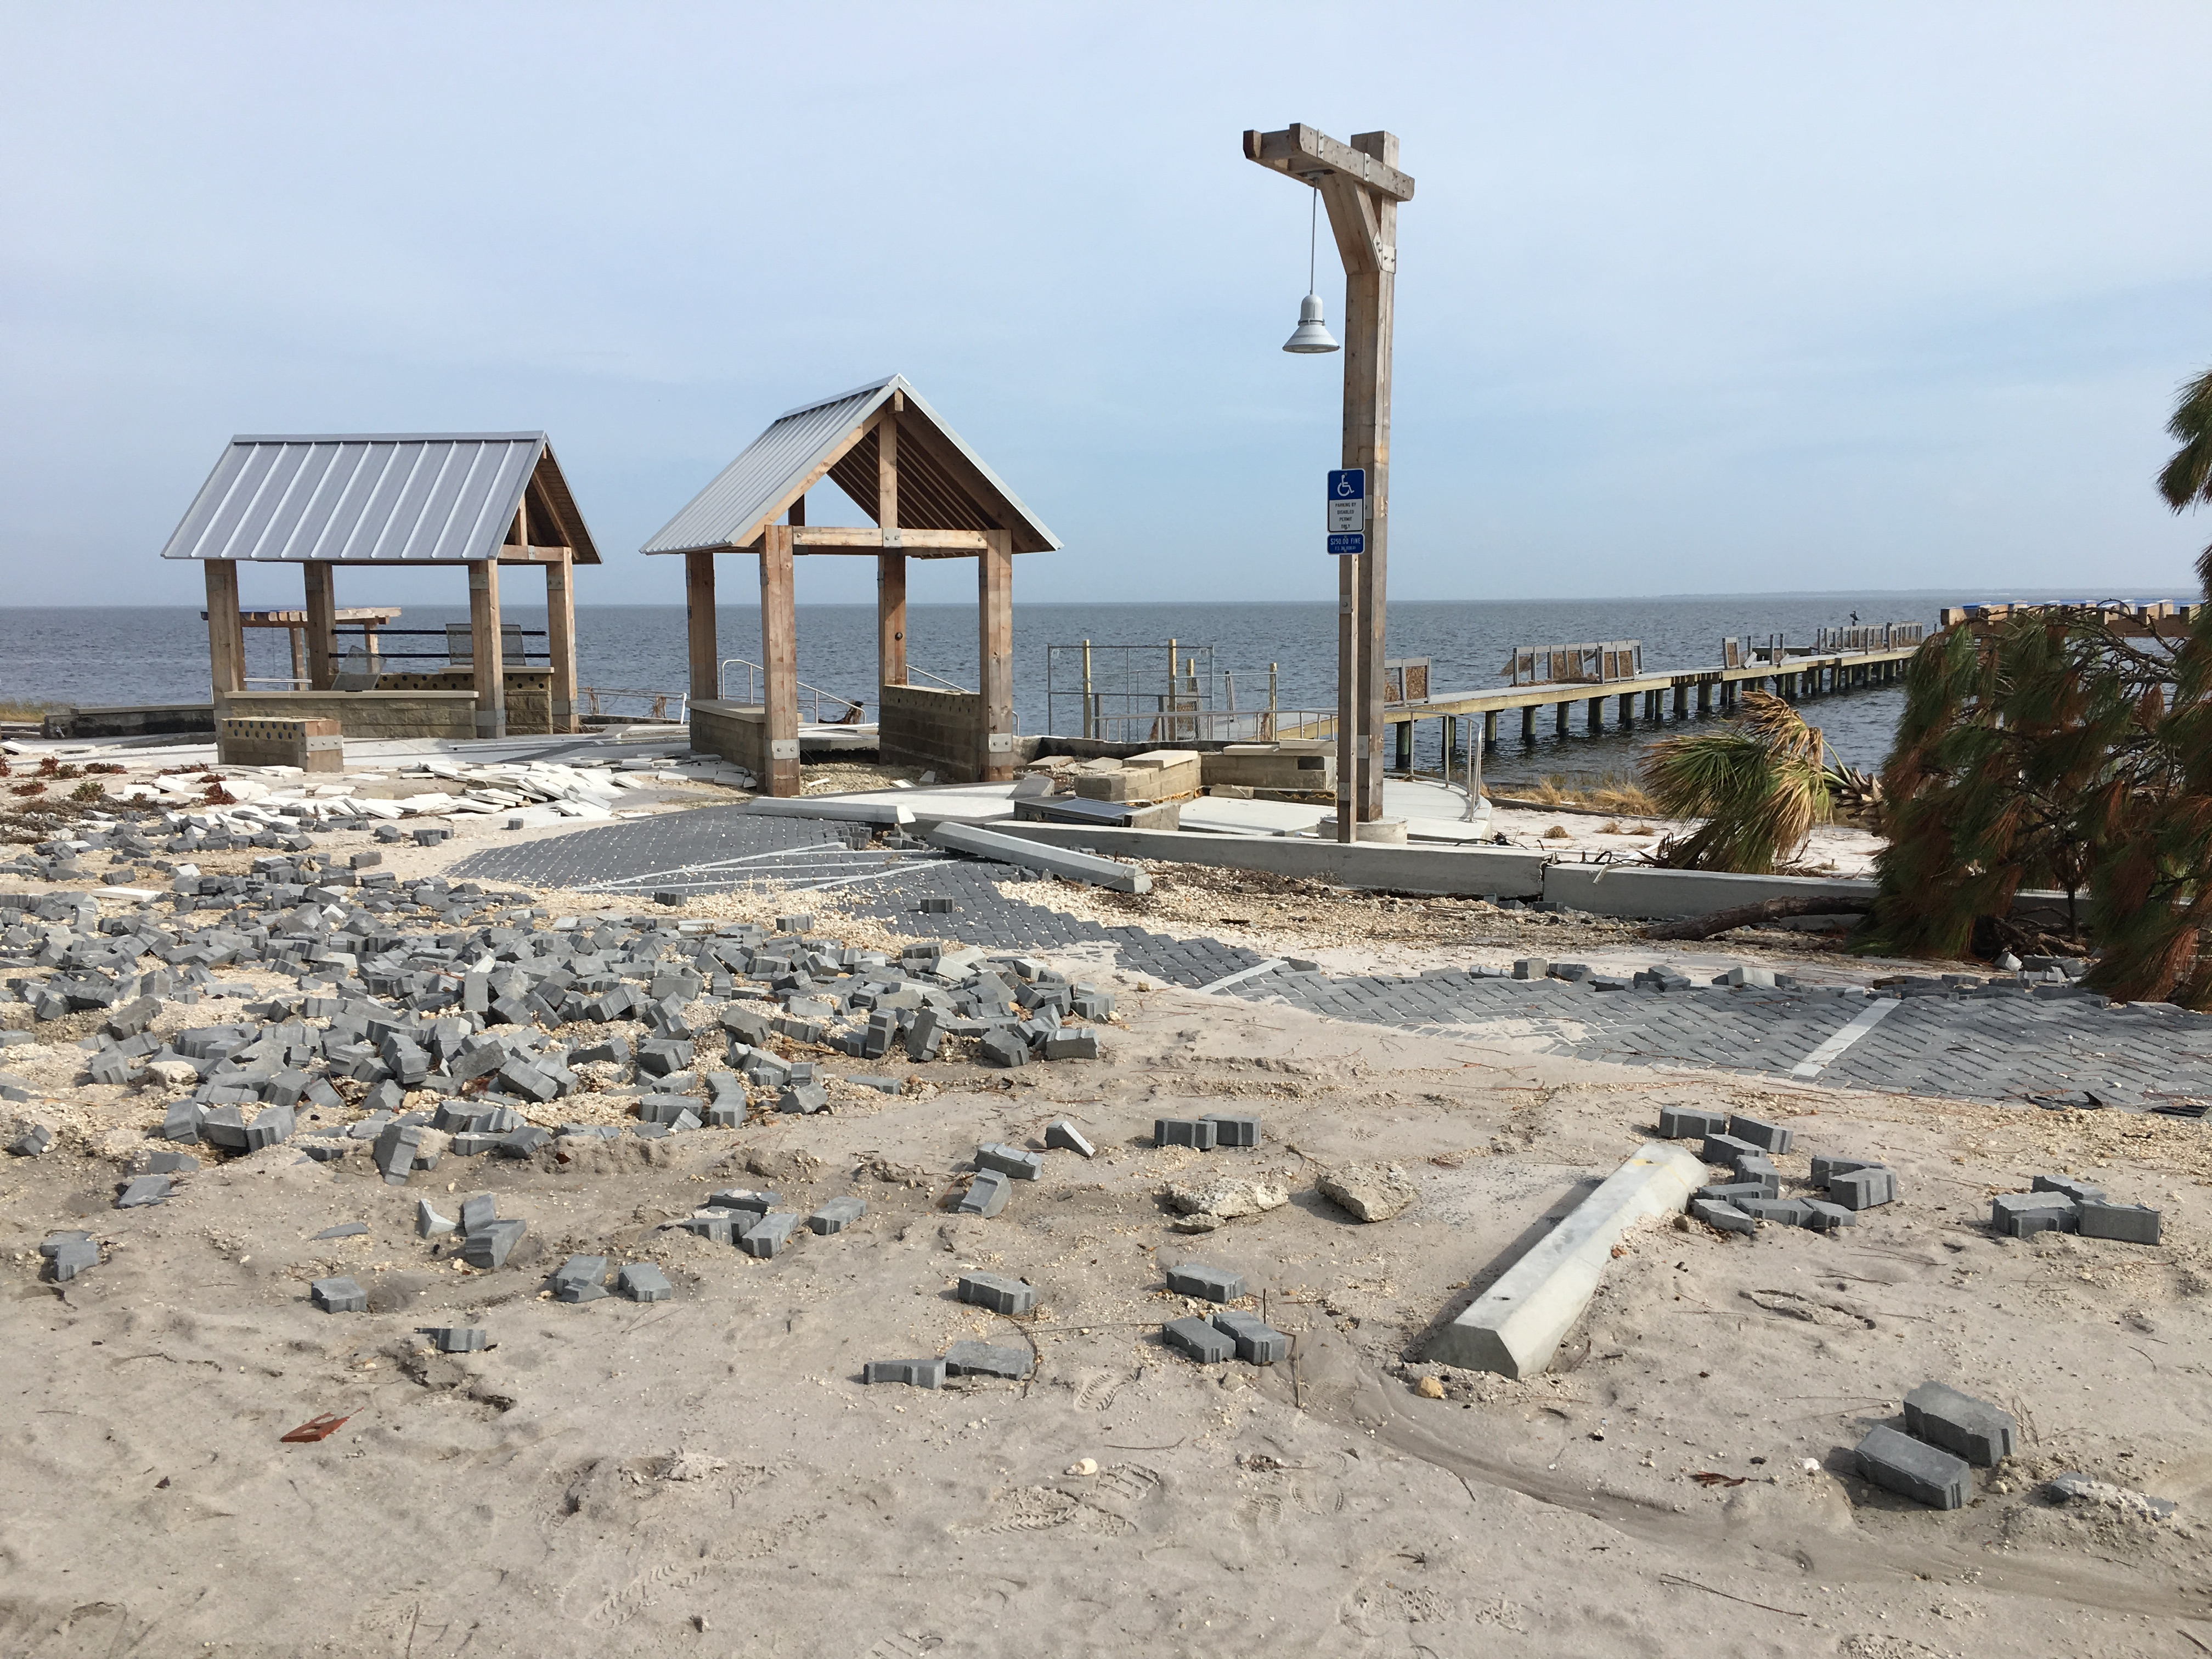 Two damaged pavilions at Island View Park after Hurricane Michael